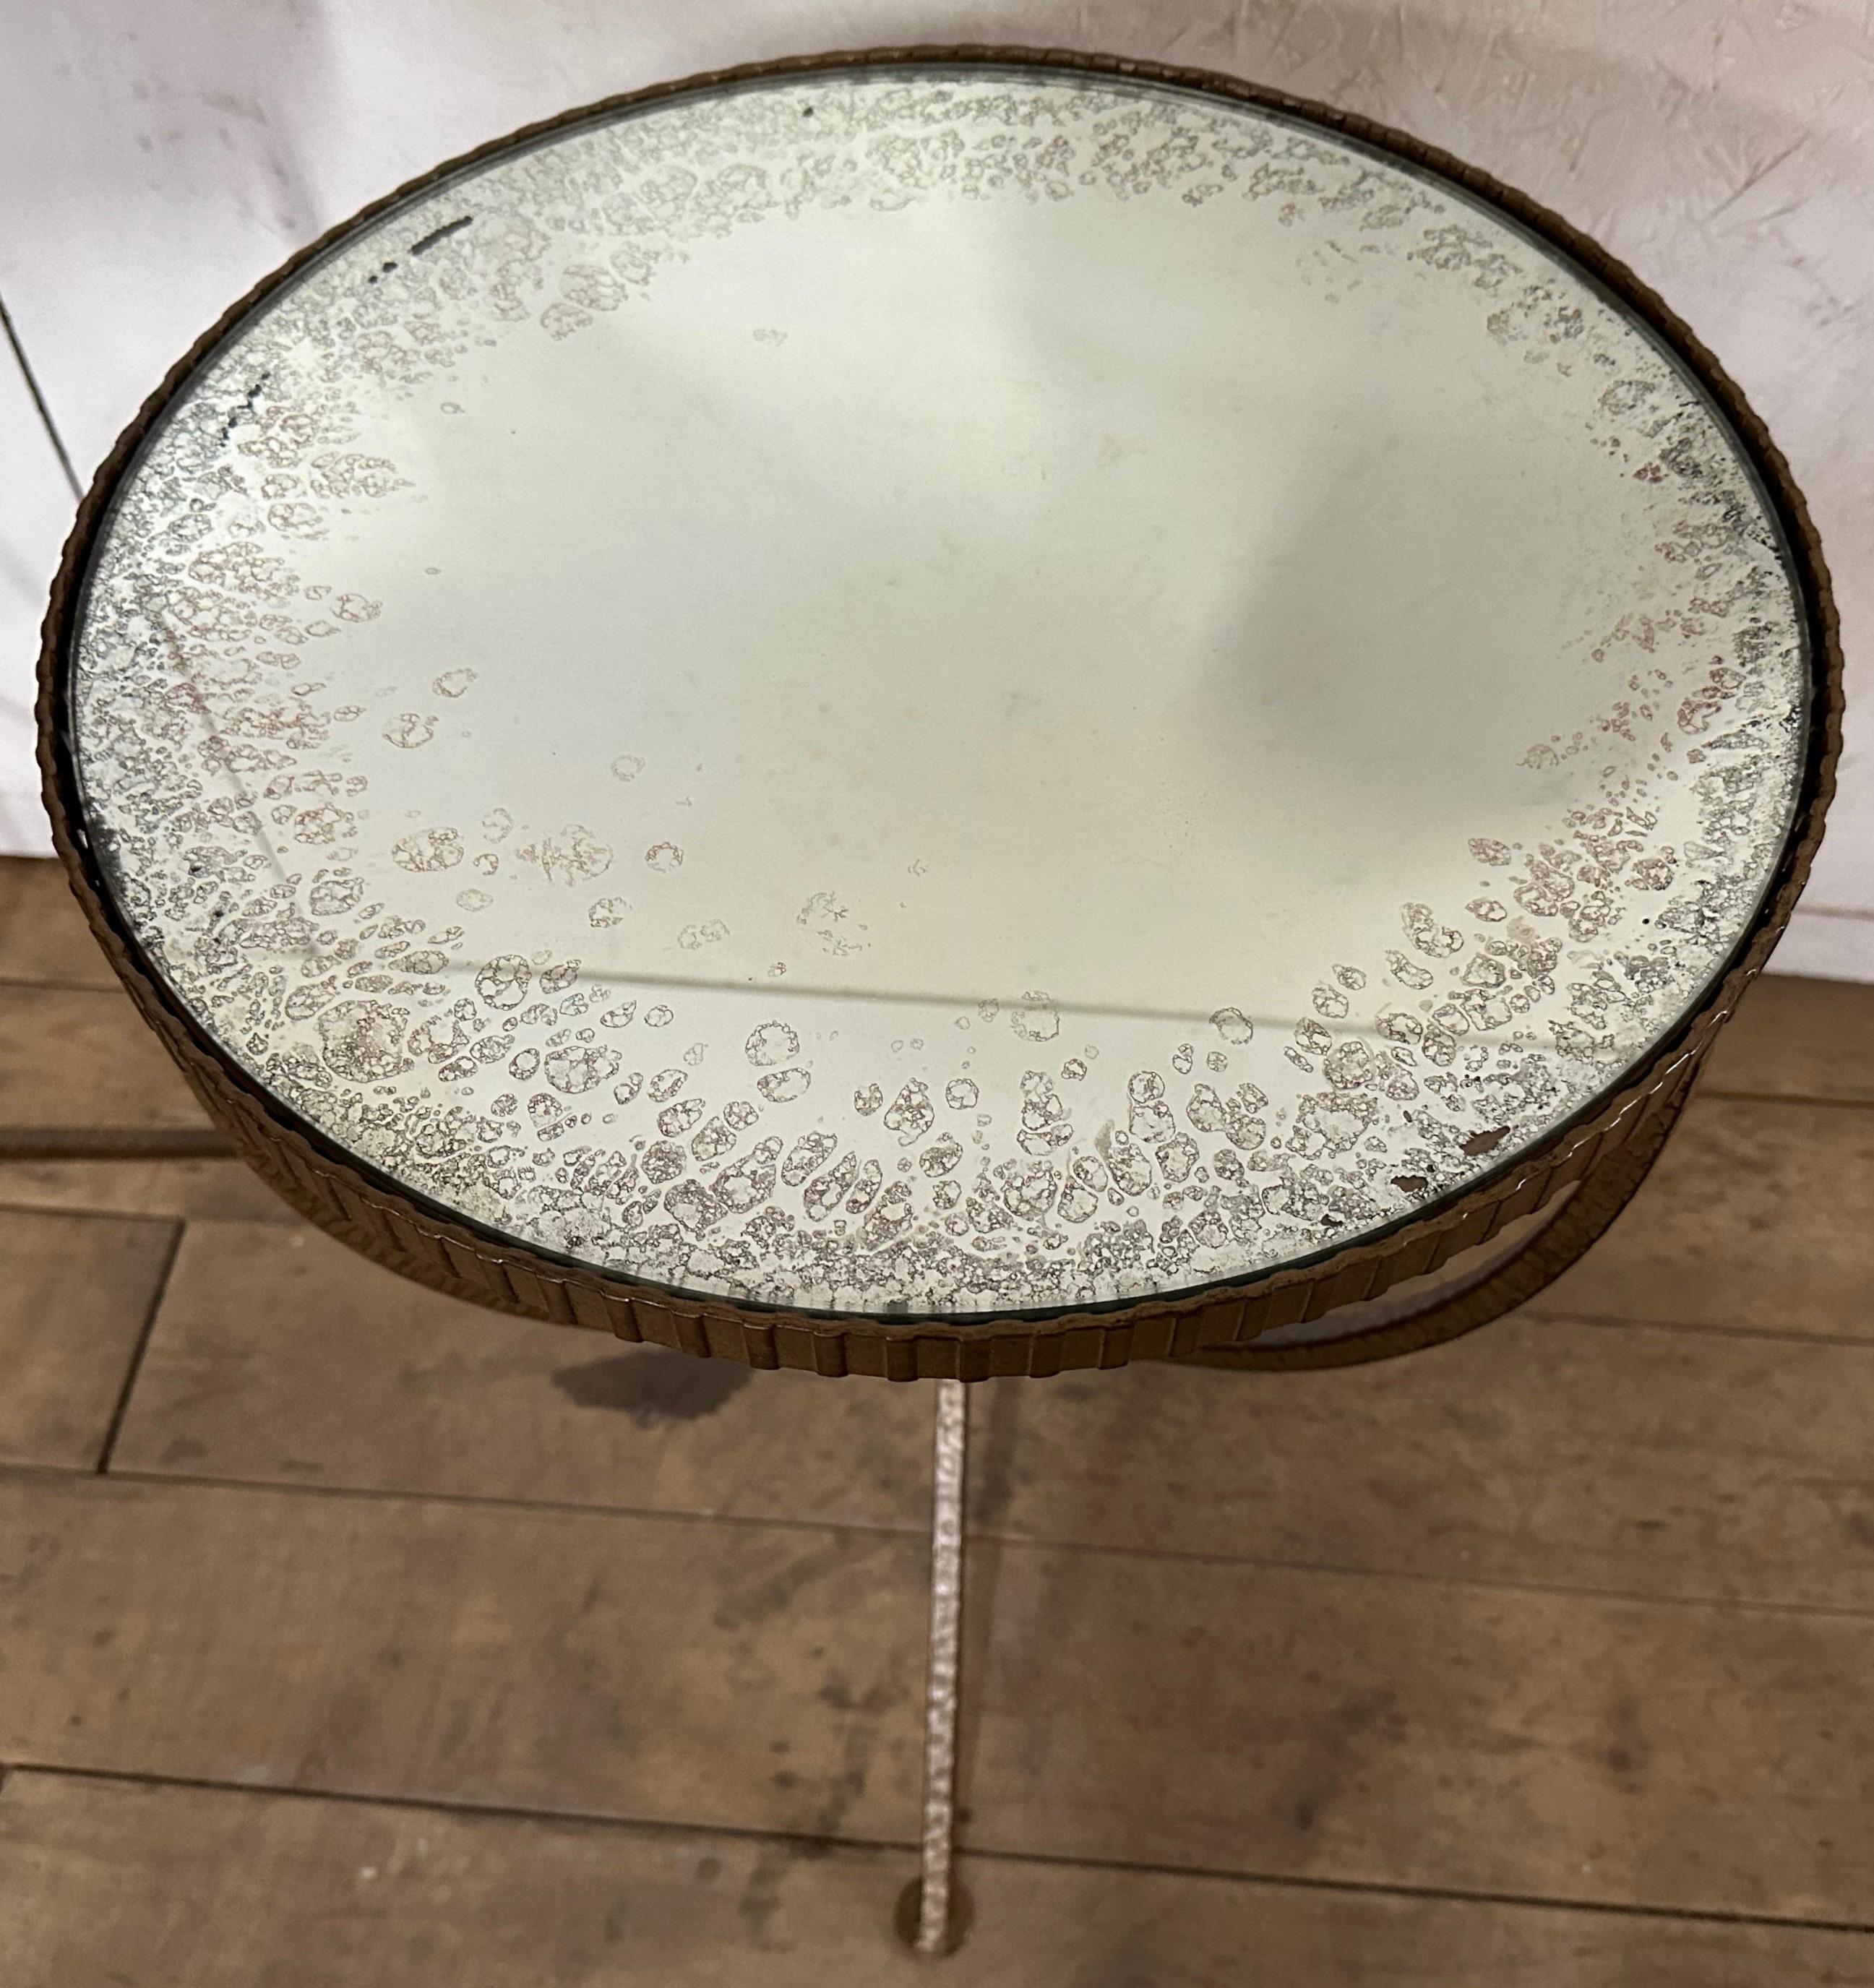 The Mid-Century Modern Round gold toned table has a hammered texture iron frame with antiqued mirror to give it character. This side, end table or accent table has the elegance in the manner of an Hollywood Regency or neoclassical table.
The table